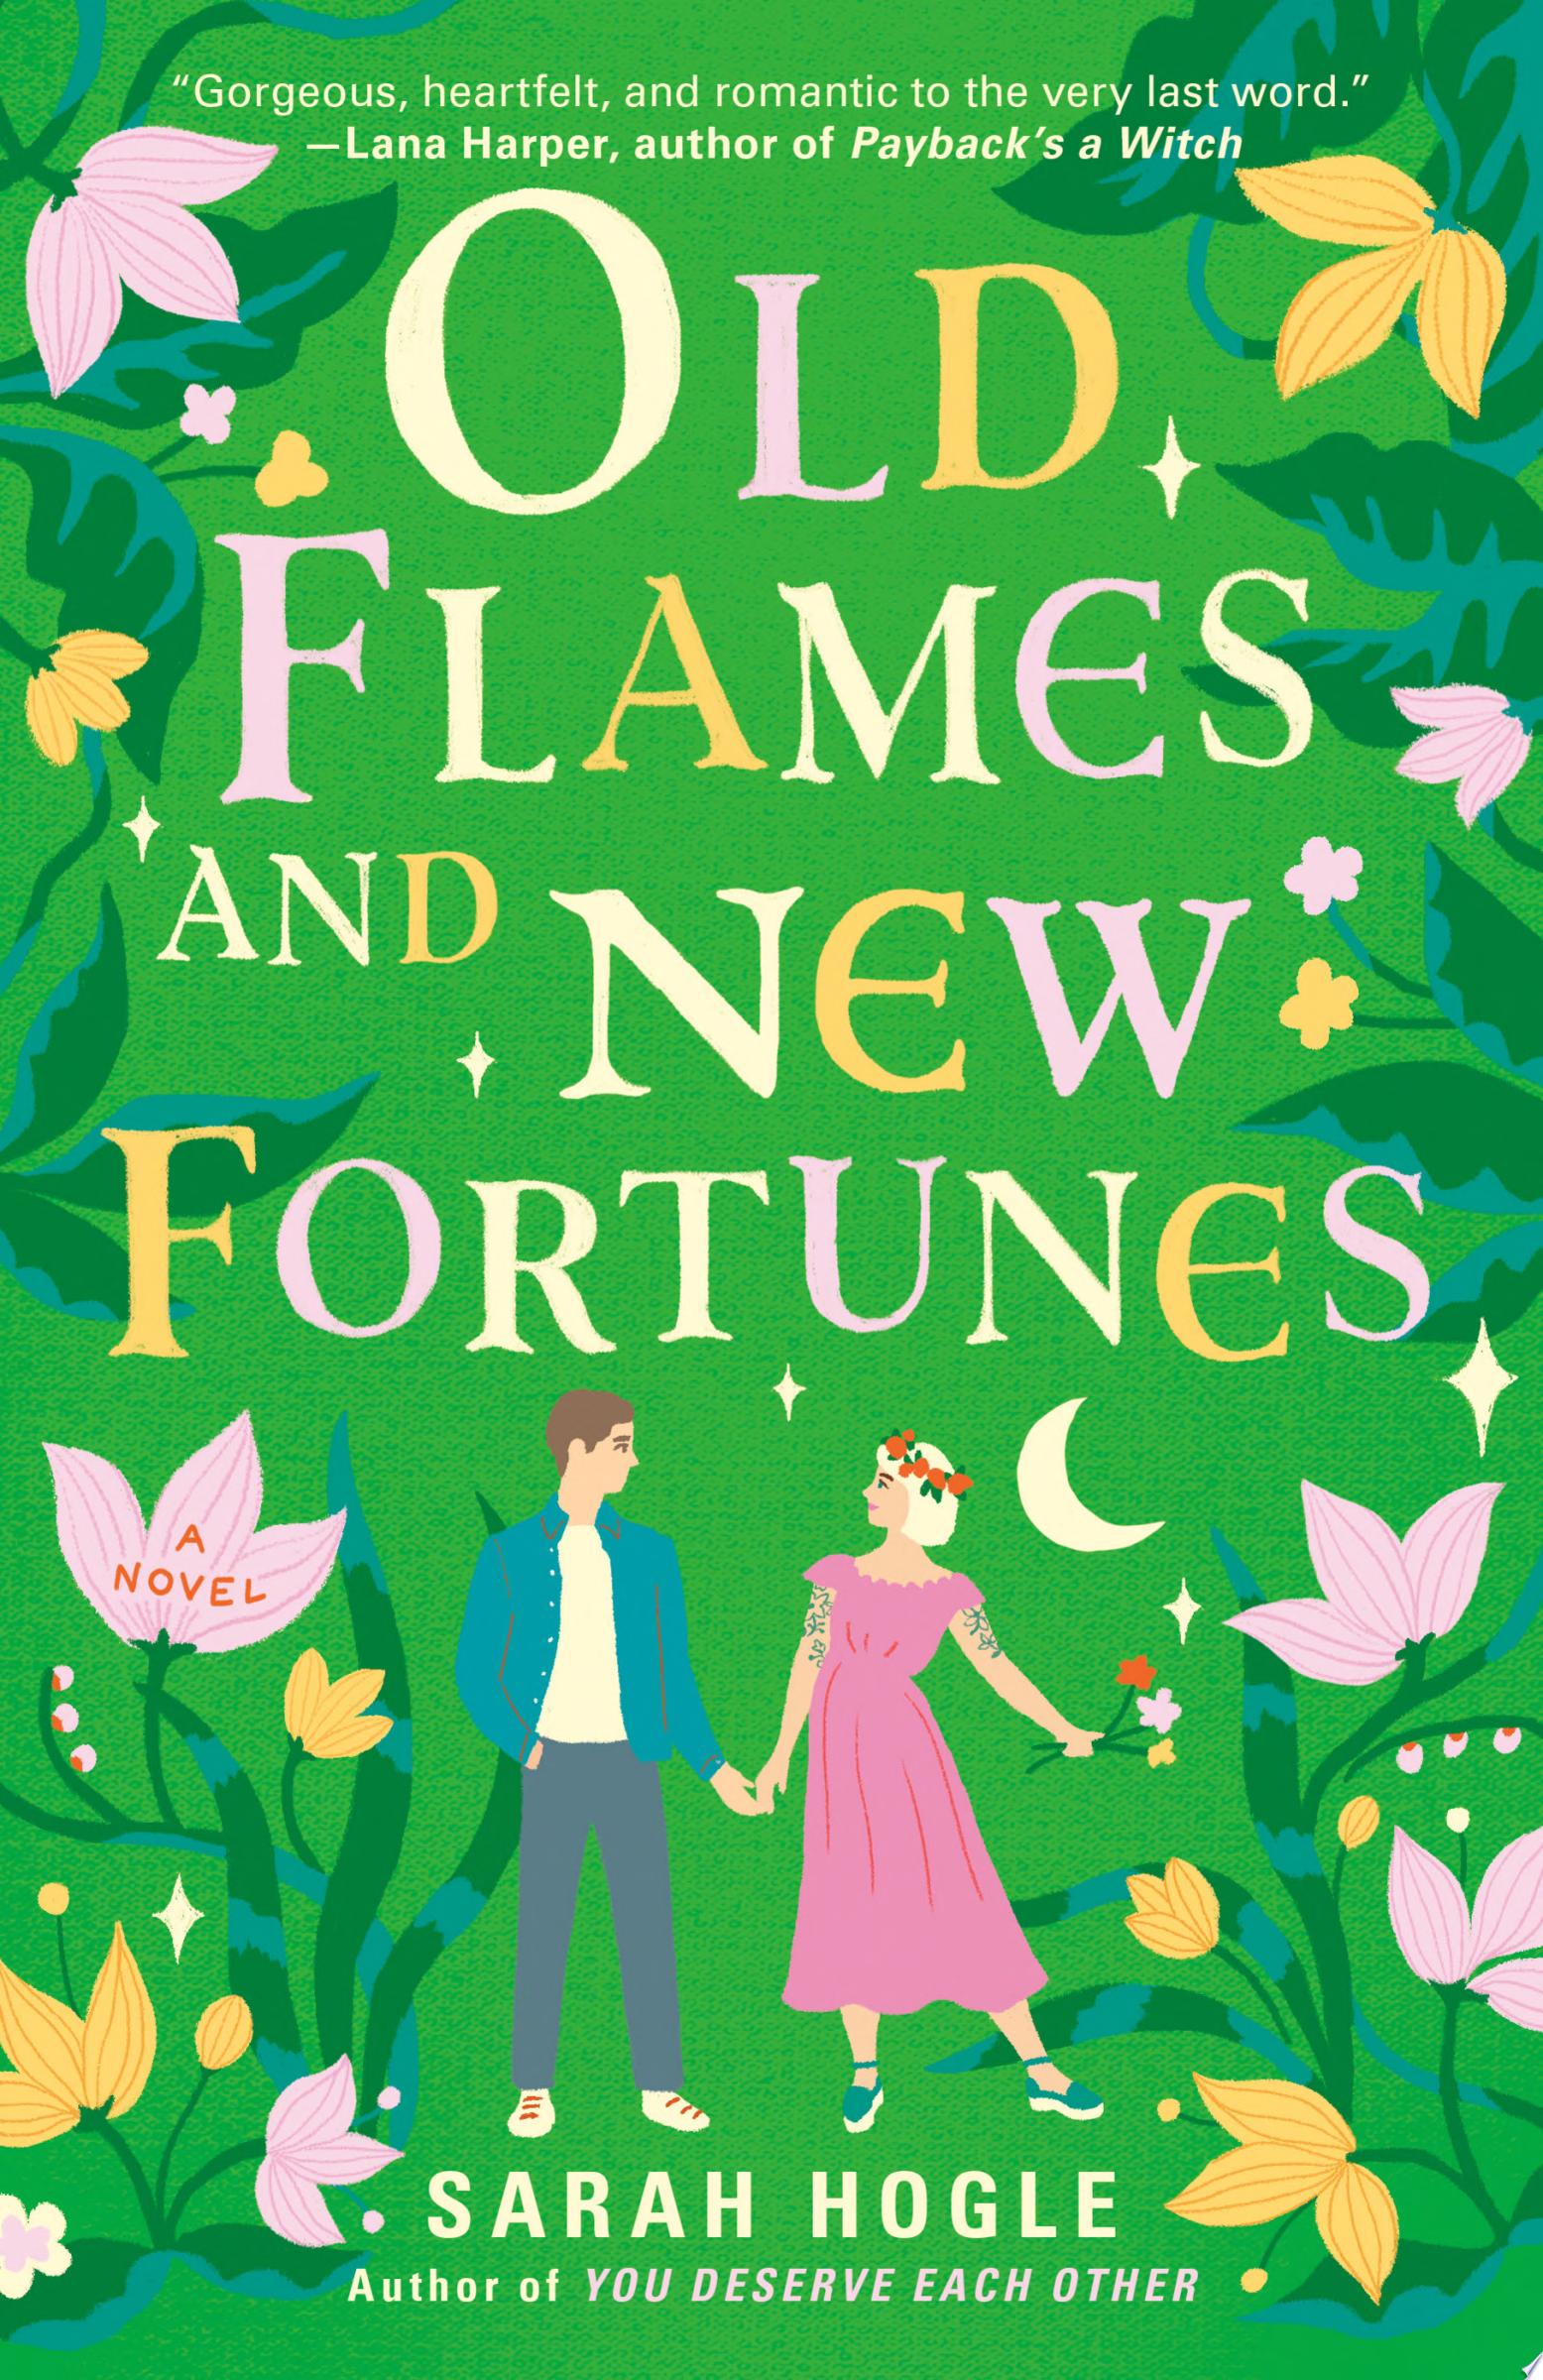 Image for "Old Flames and New Fortunes" by Sarah Hogle